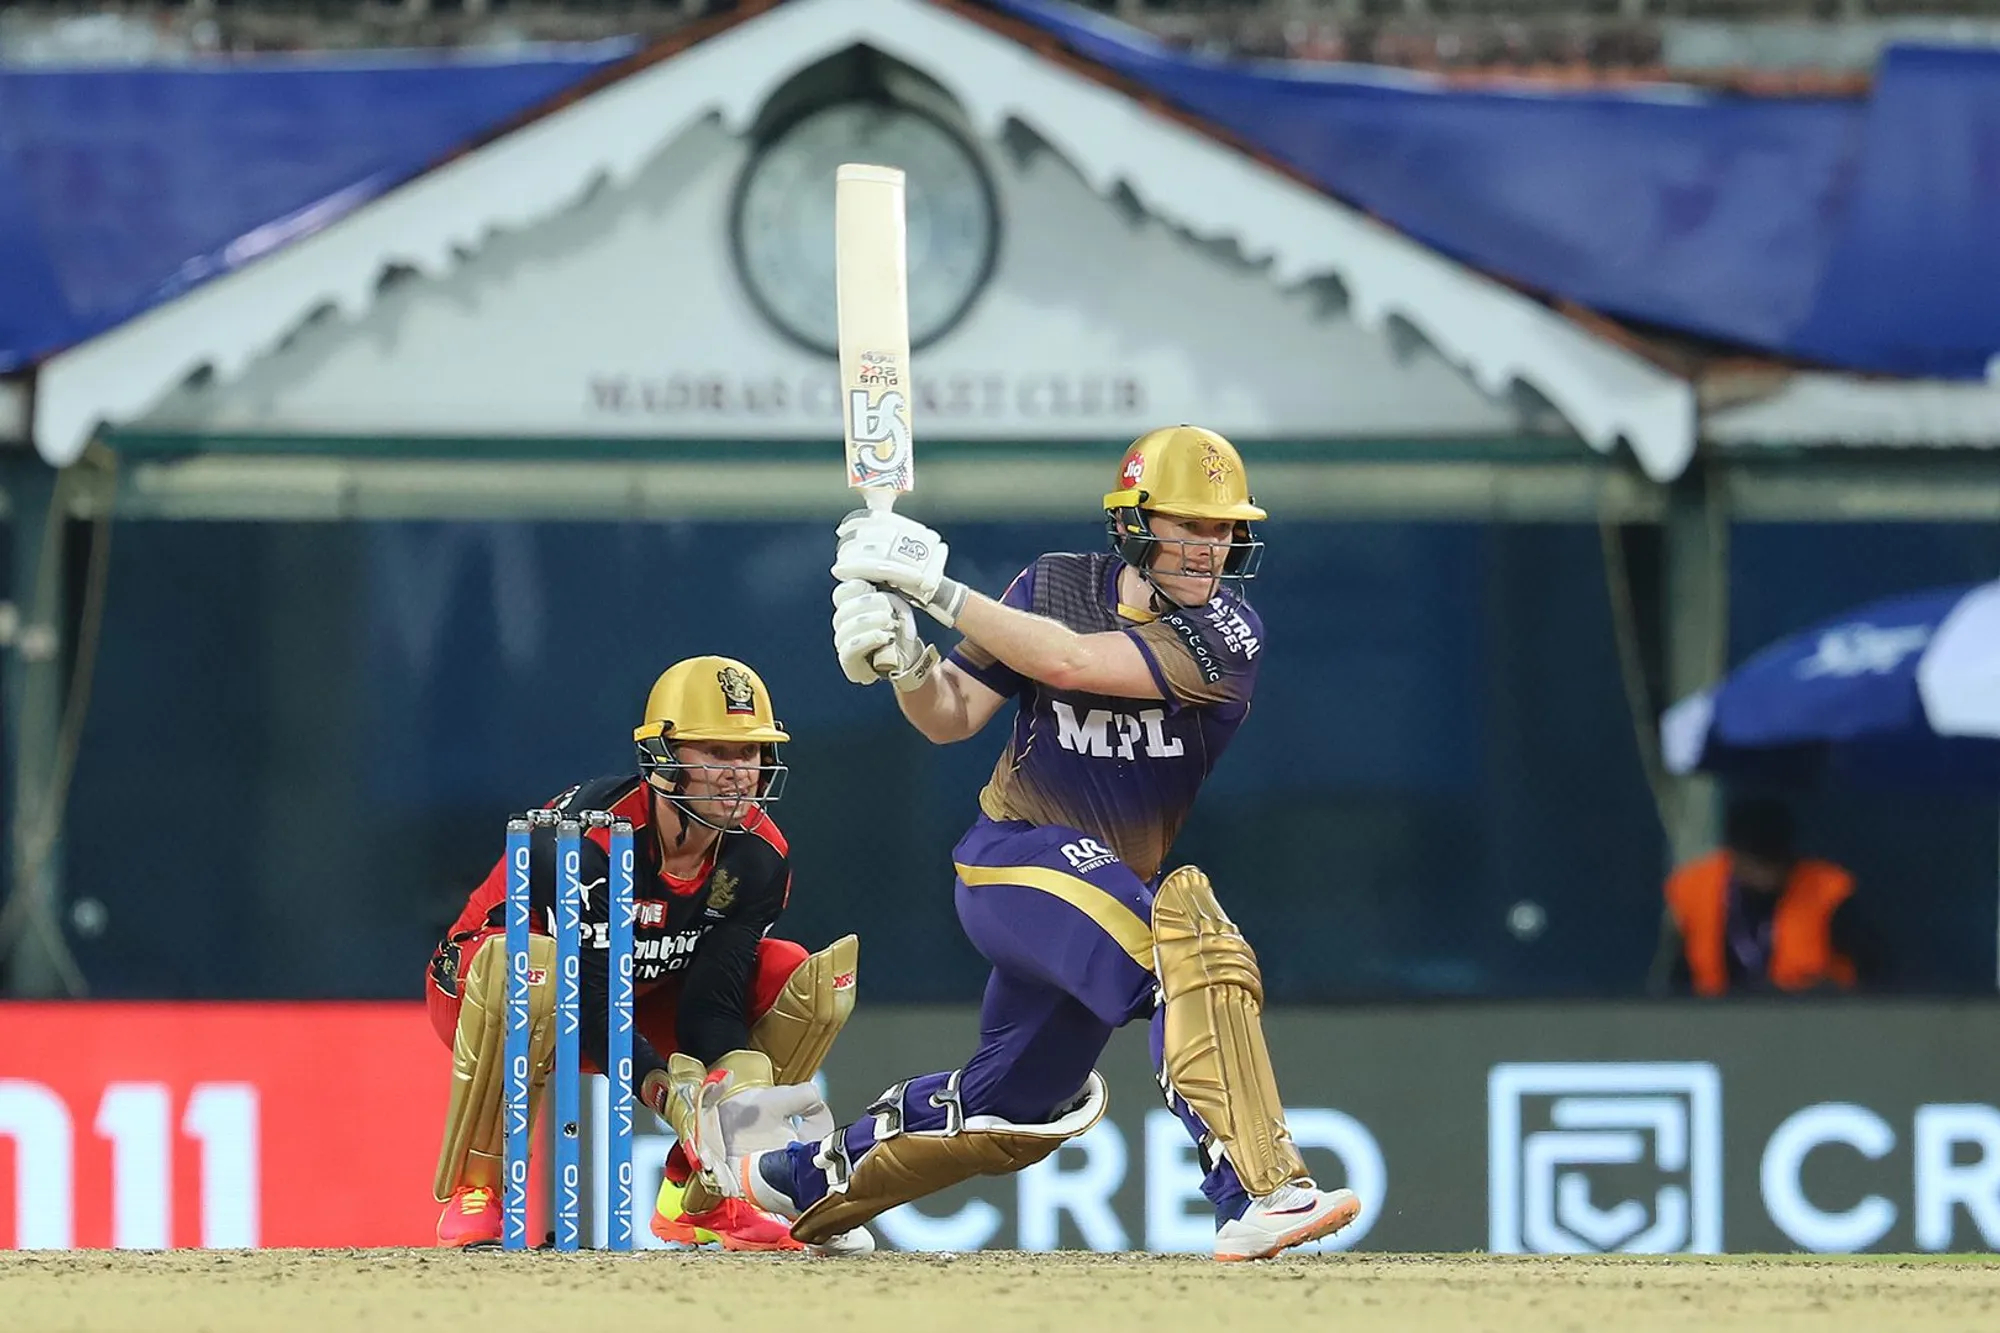 Morgan will need to somehow inspire the KKR team | BCCI-IPL